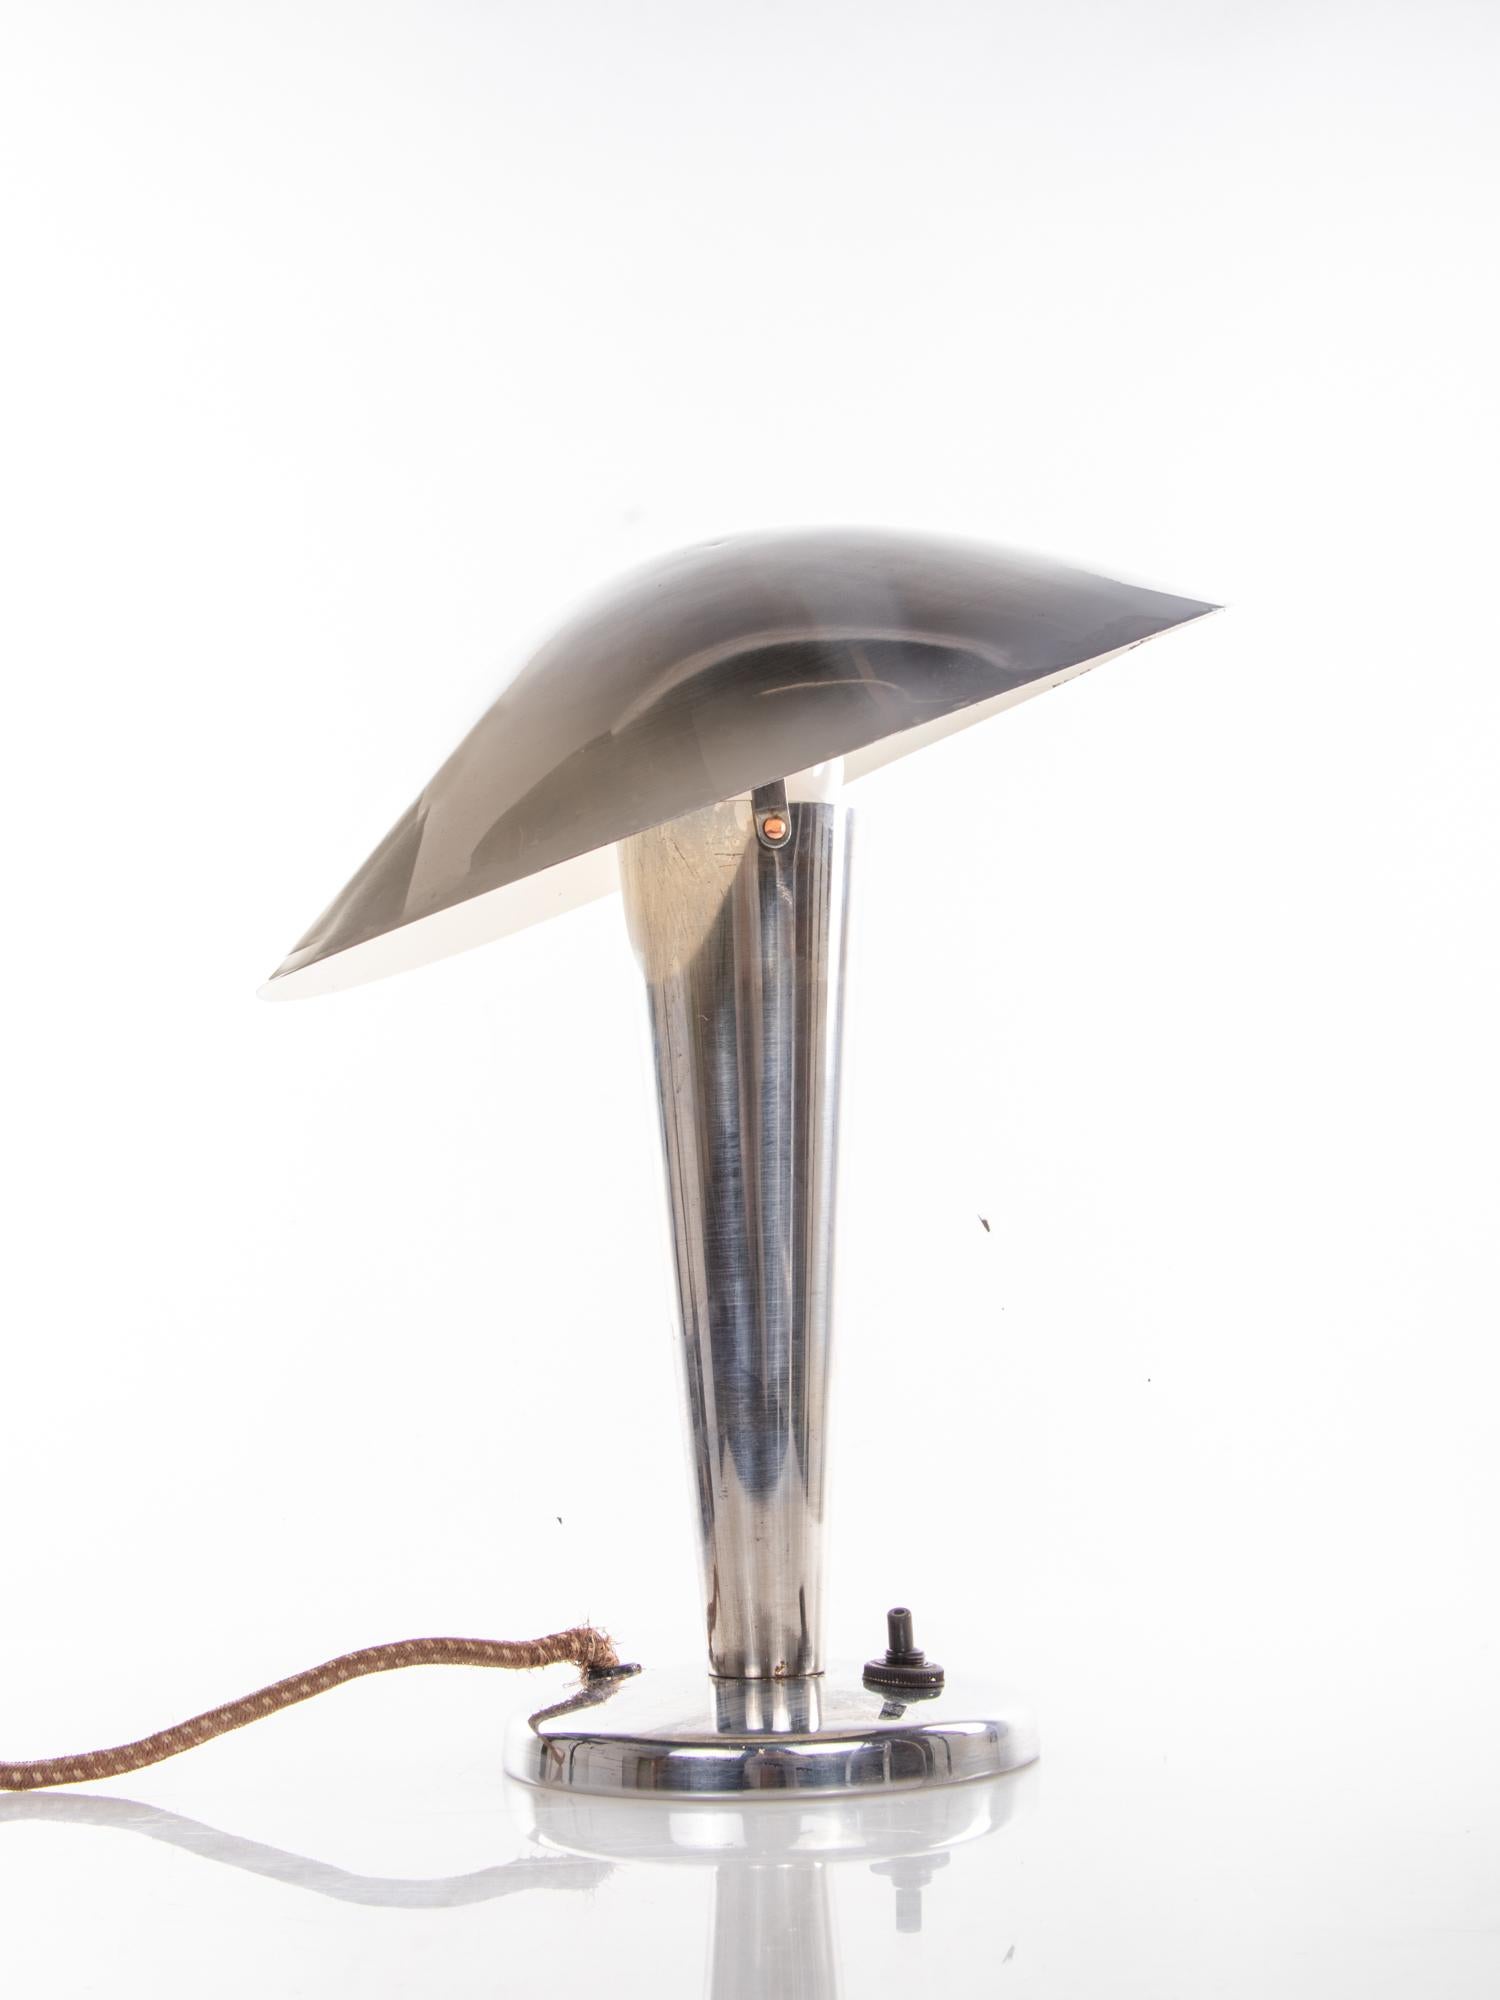 The chrome mushroom shaped adjustable table lamp is a great example of Czech lighting from the 1950s.
Quality, craftsmanship and functionalism in its finest form!
Takes one large Edison bulb E27.
Measurements: Diameter 11.8 in. / 30 cm, height